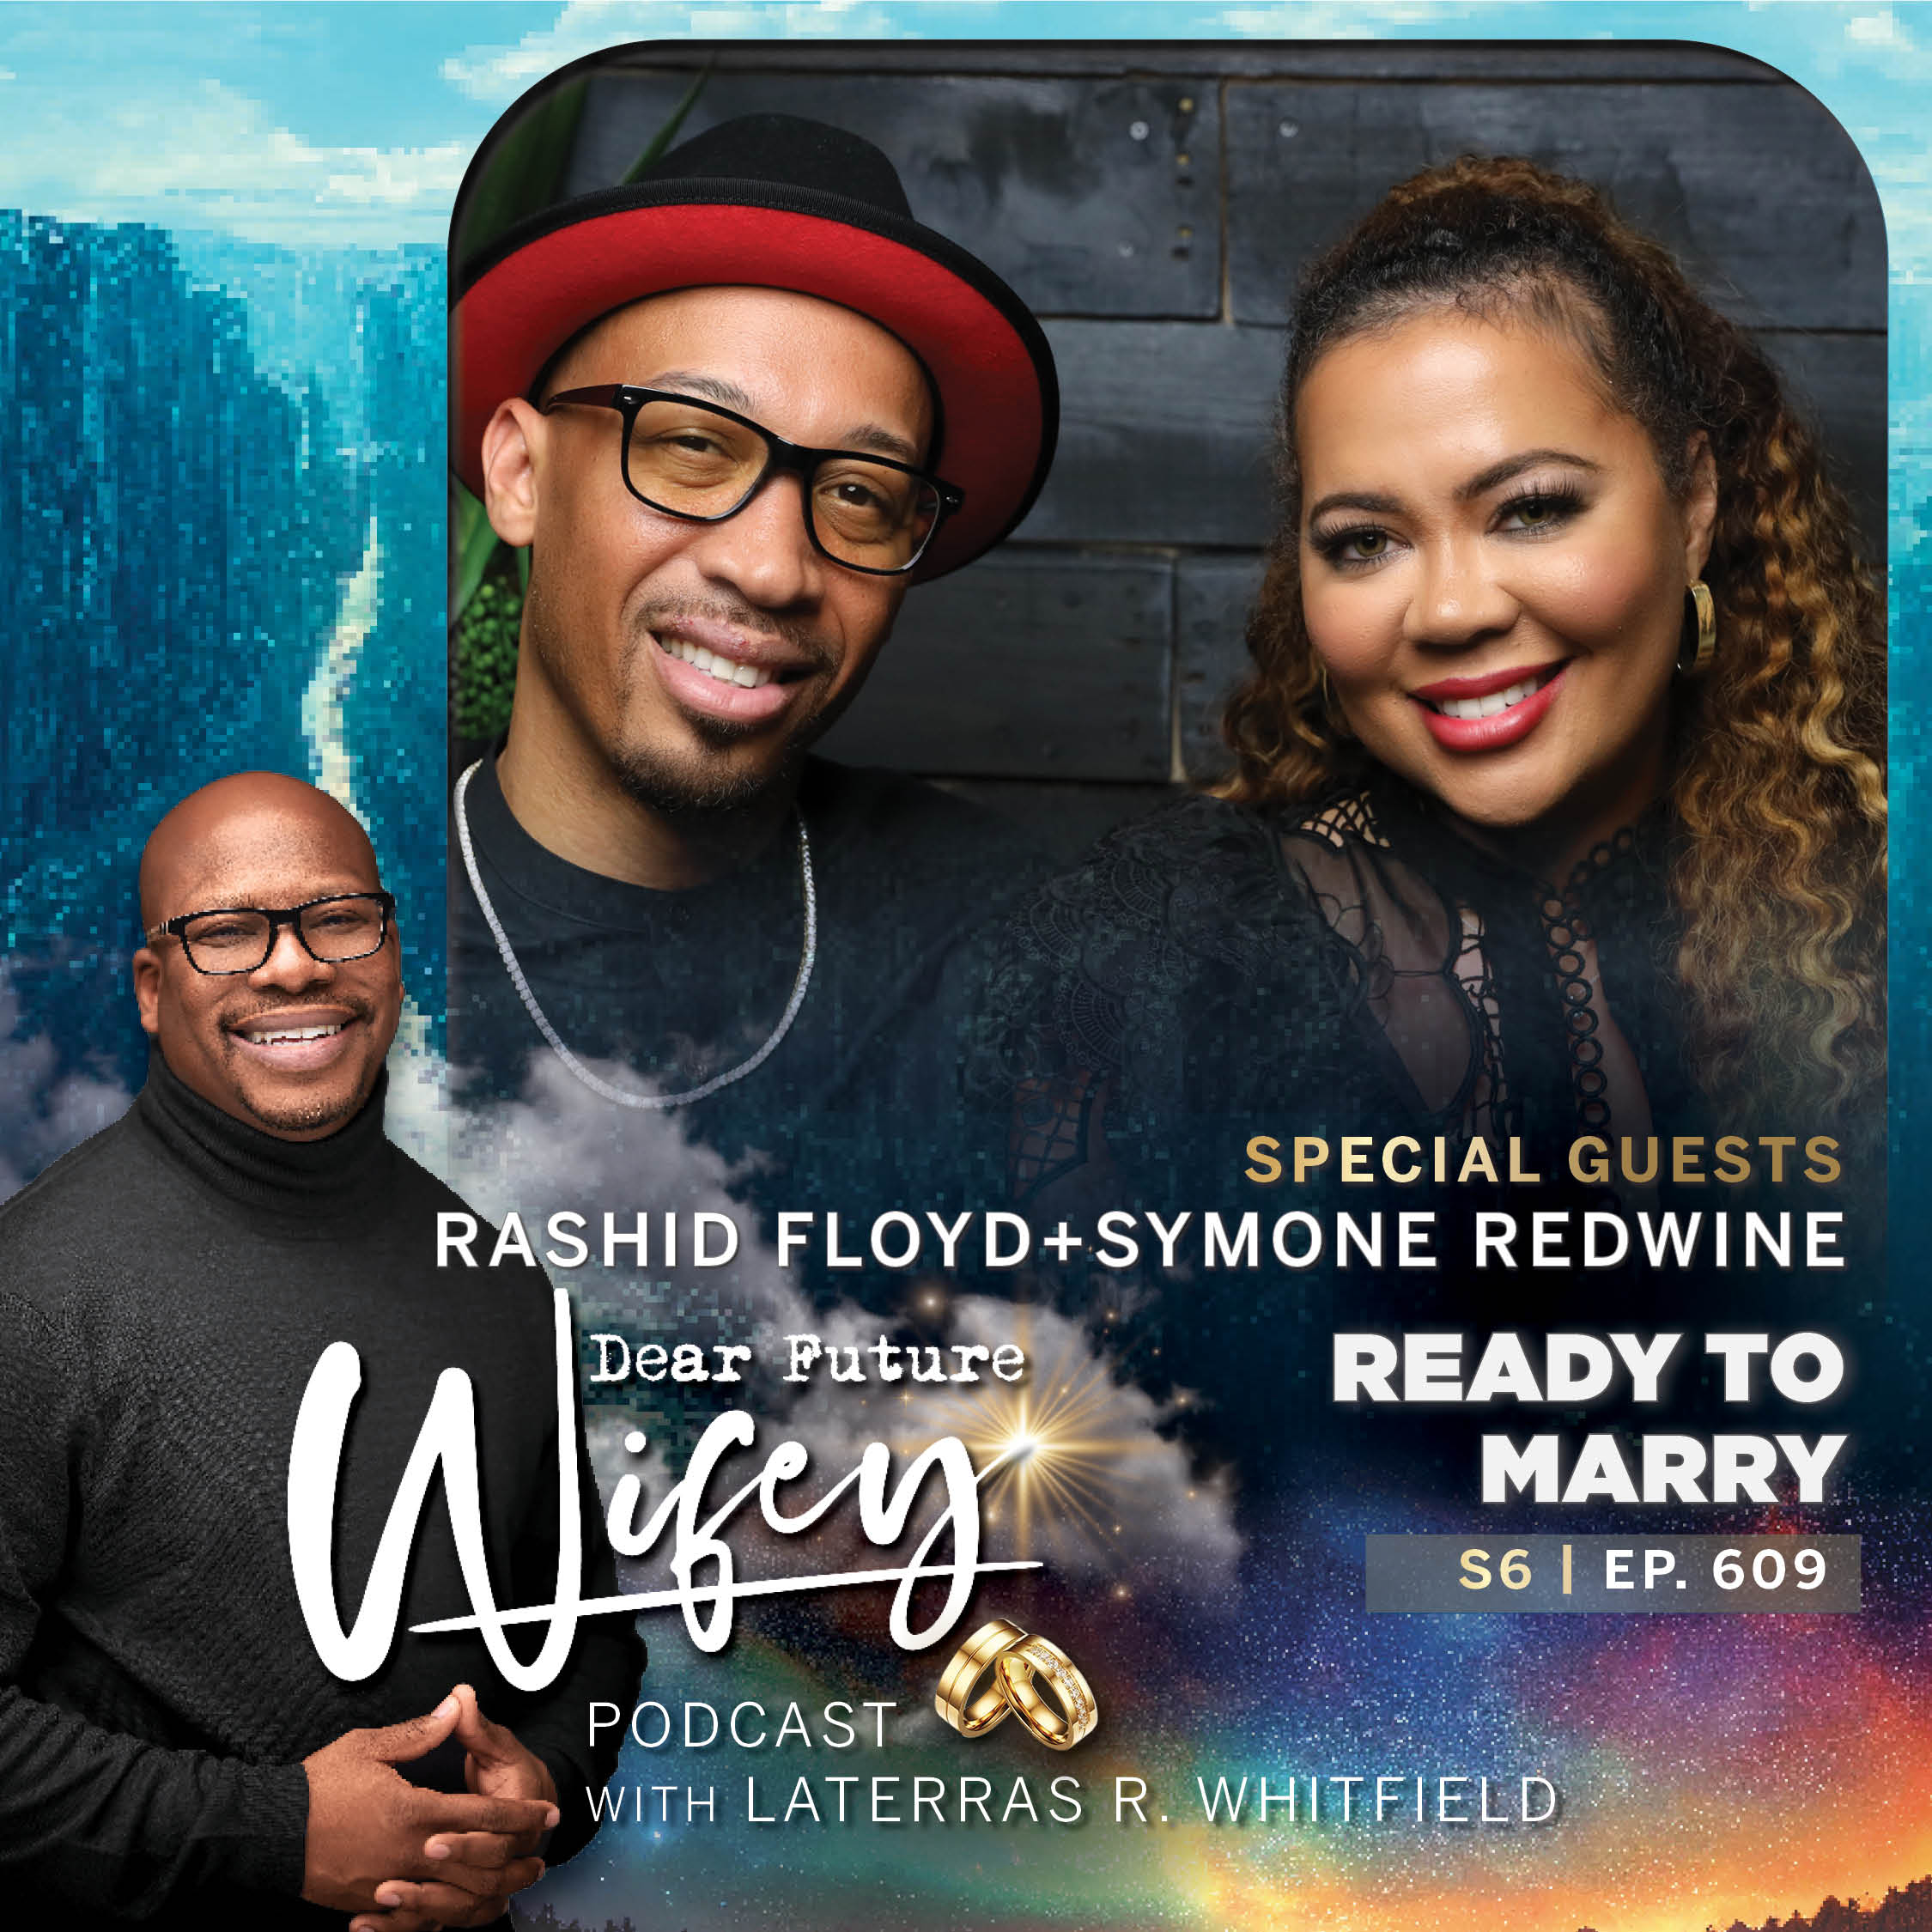 Ready to Marry (Guests: Rashid Floyd and Symone Redwine)